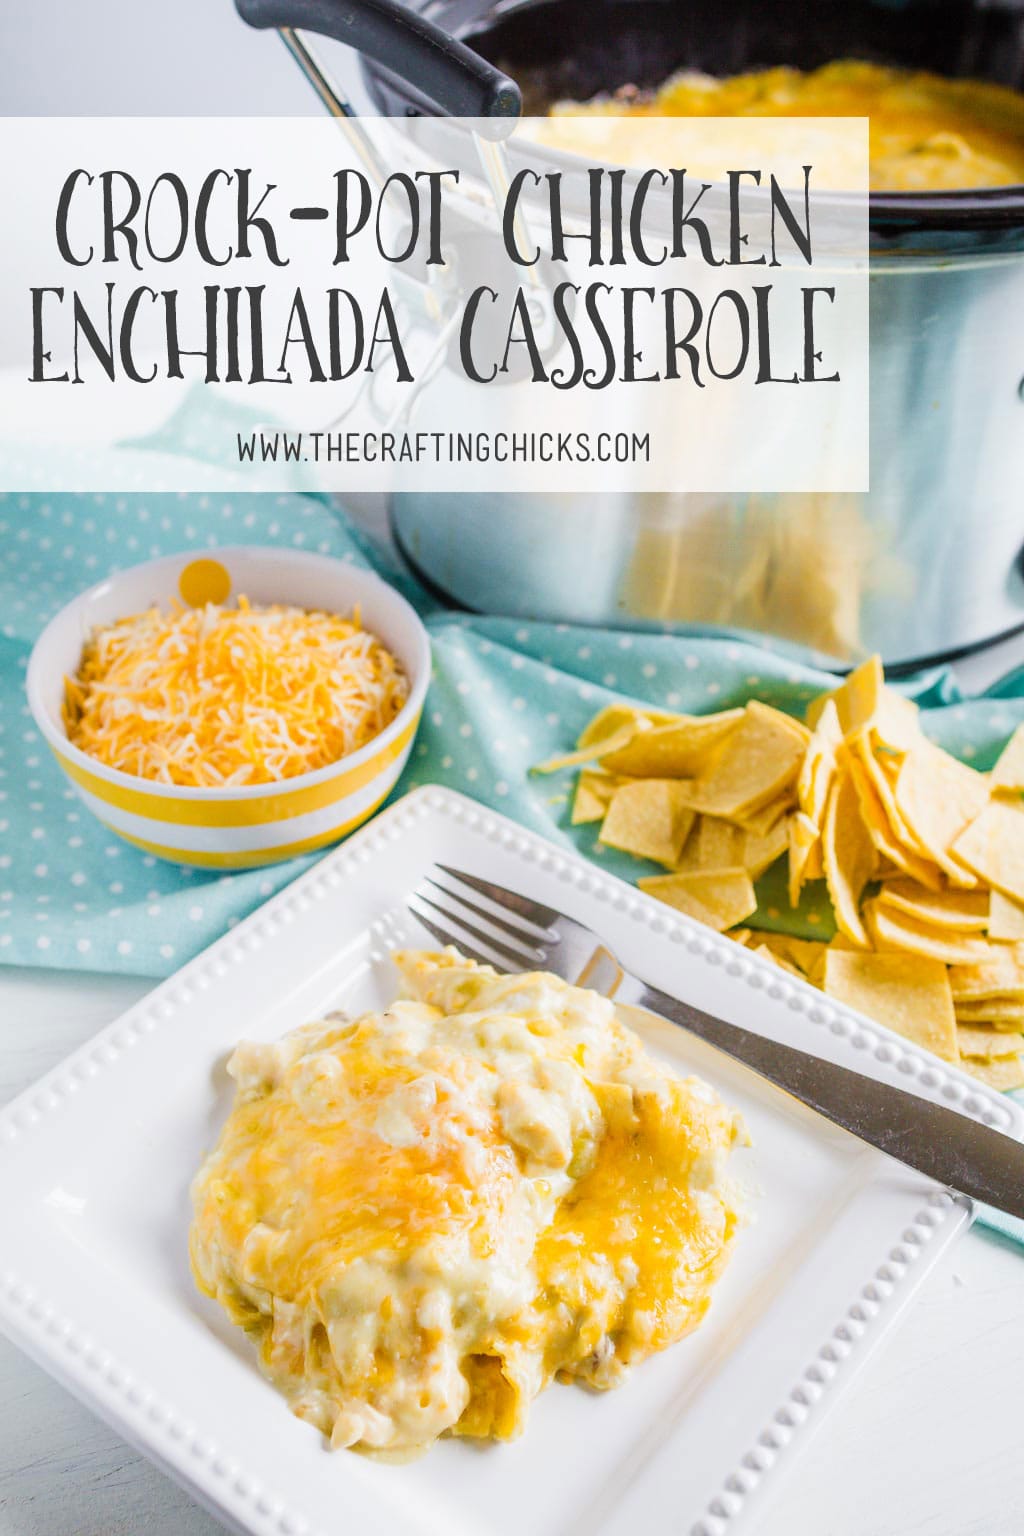 Crockpot Chicken Enchilada Casserole is easy but full of flavor. With green chilies and lots of cheese, this is a crowd pleaser that can feed a crowd.